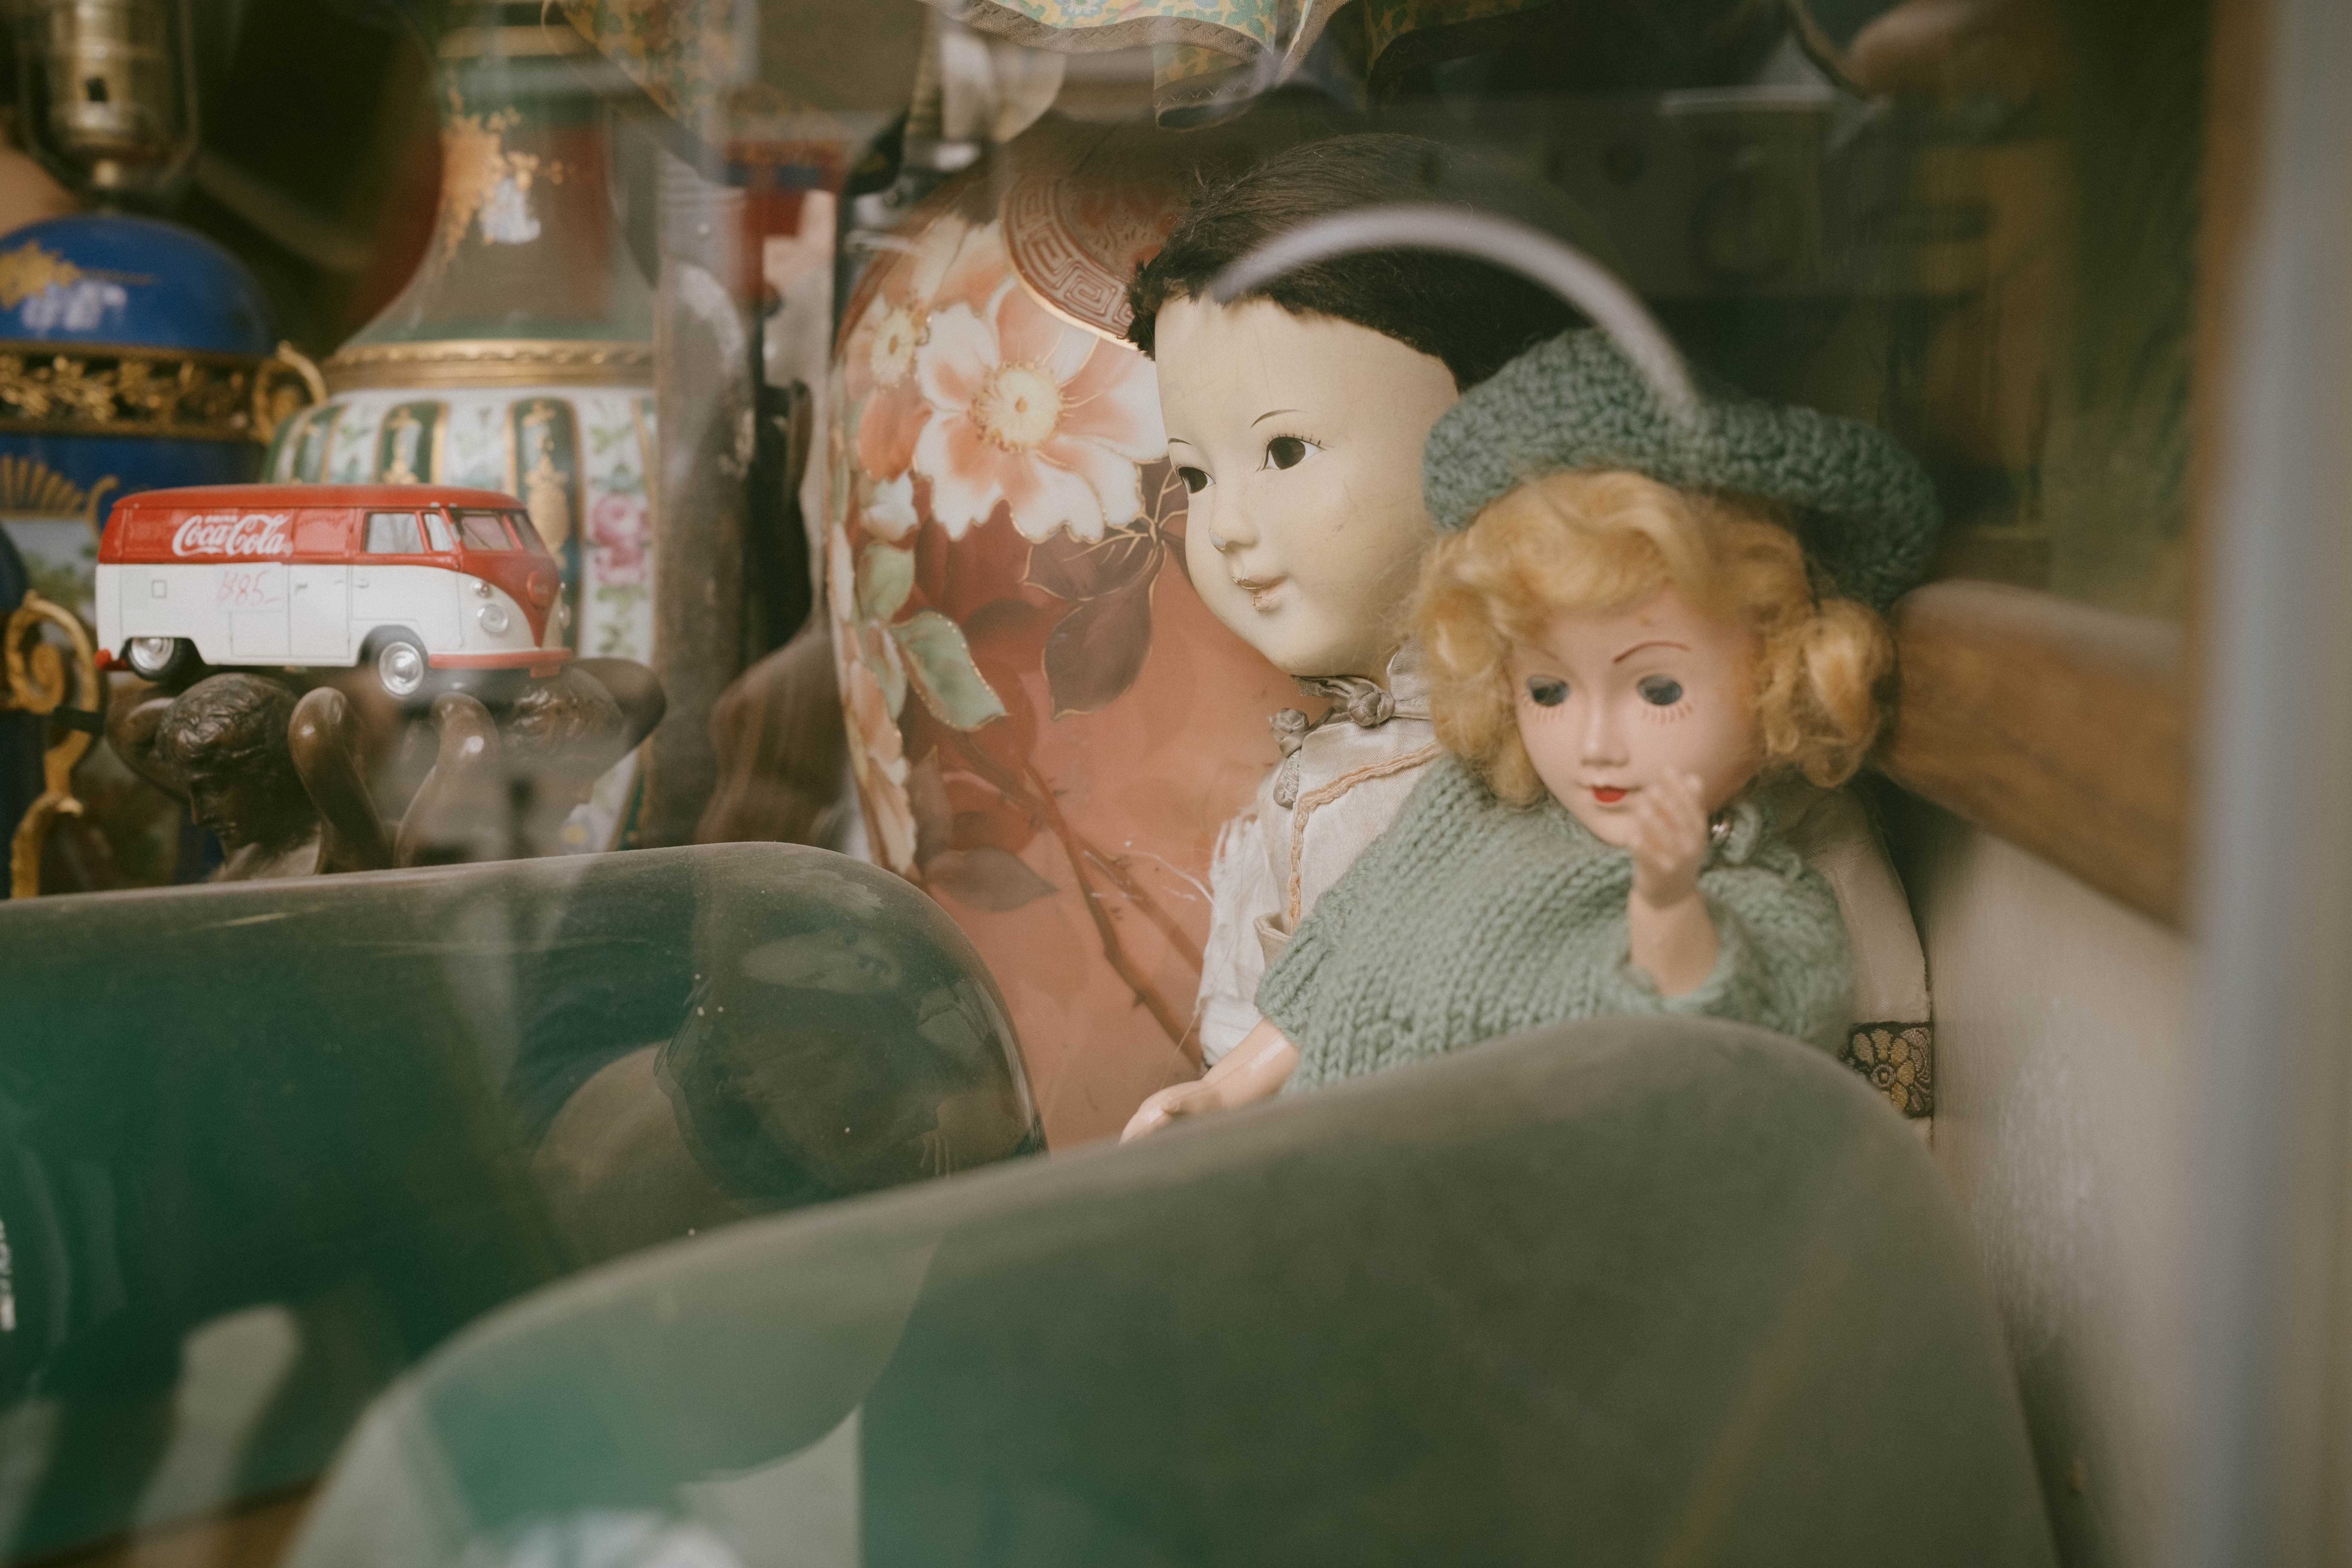 Tight shot of dolls in a storefront